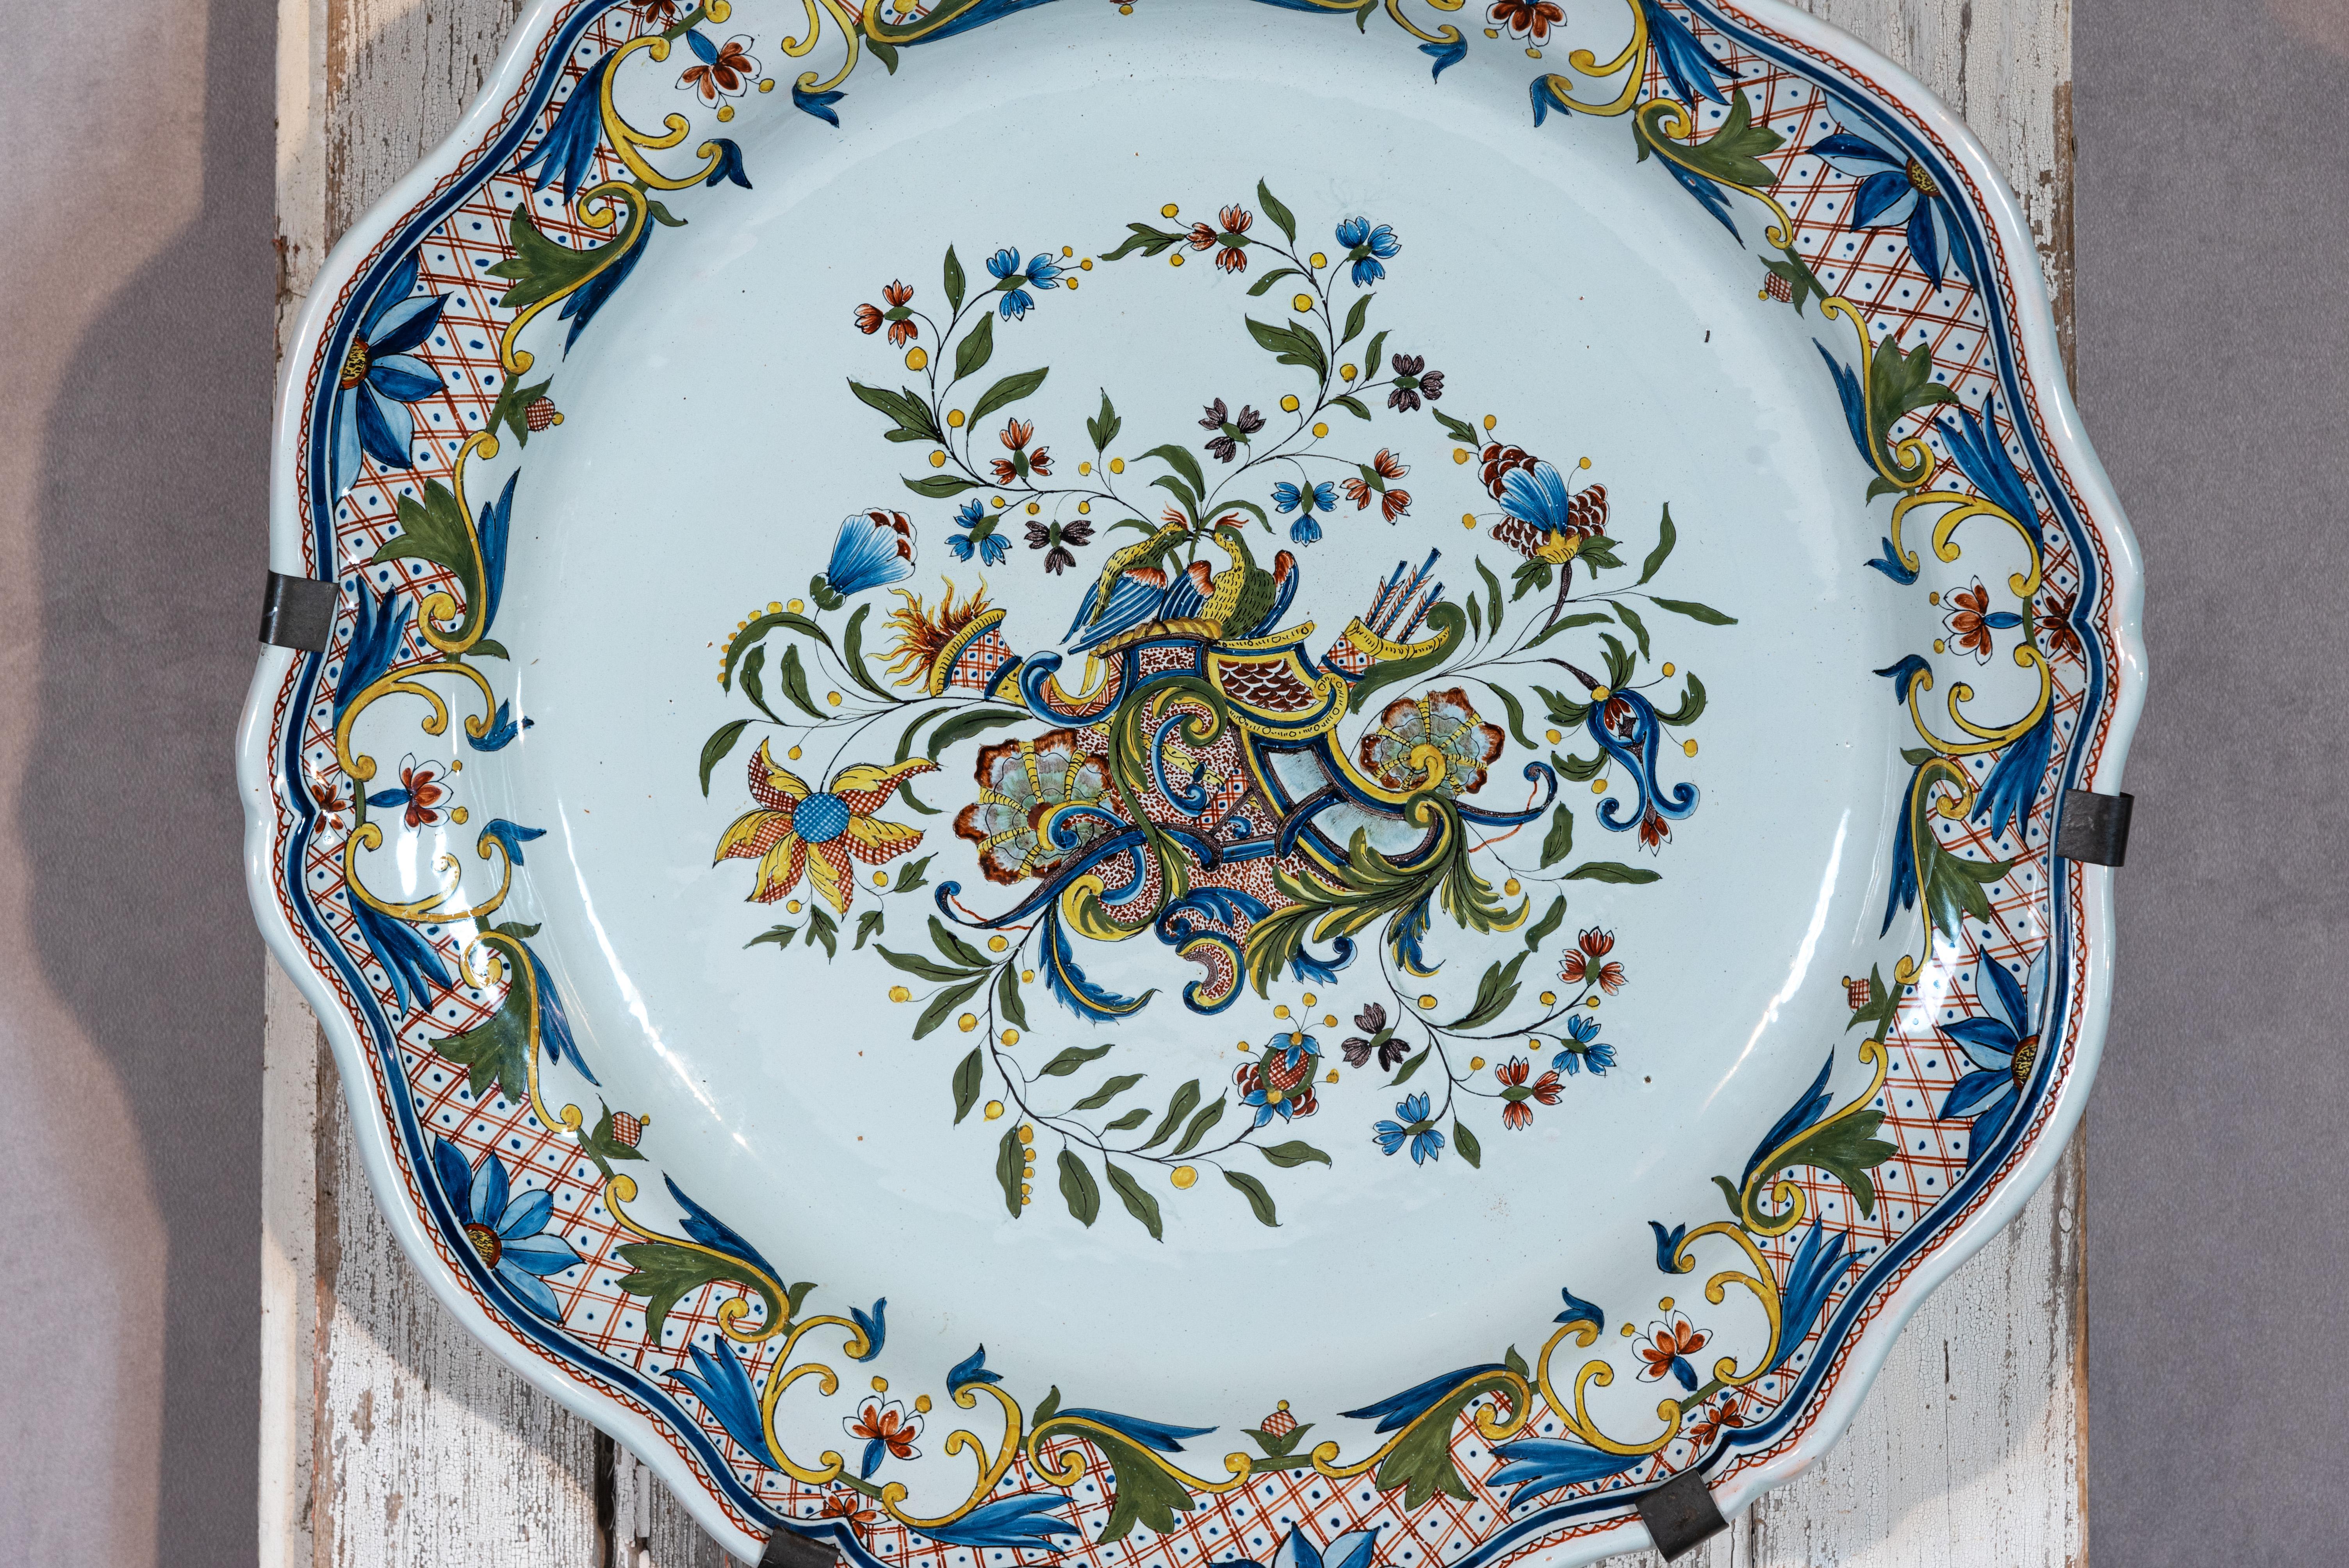 Bring a touch of French charm to your home with this beautiful French Faience Quimper Platter. Featuring stunning decorative floral ornaments within and around the plate, this platter is a testament to the remarkable quality and solidity of the